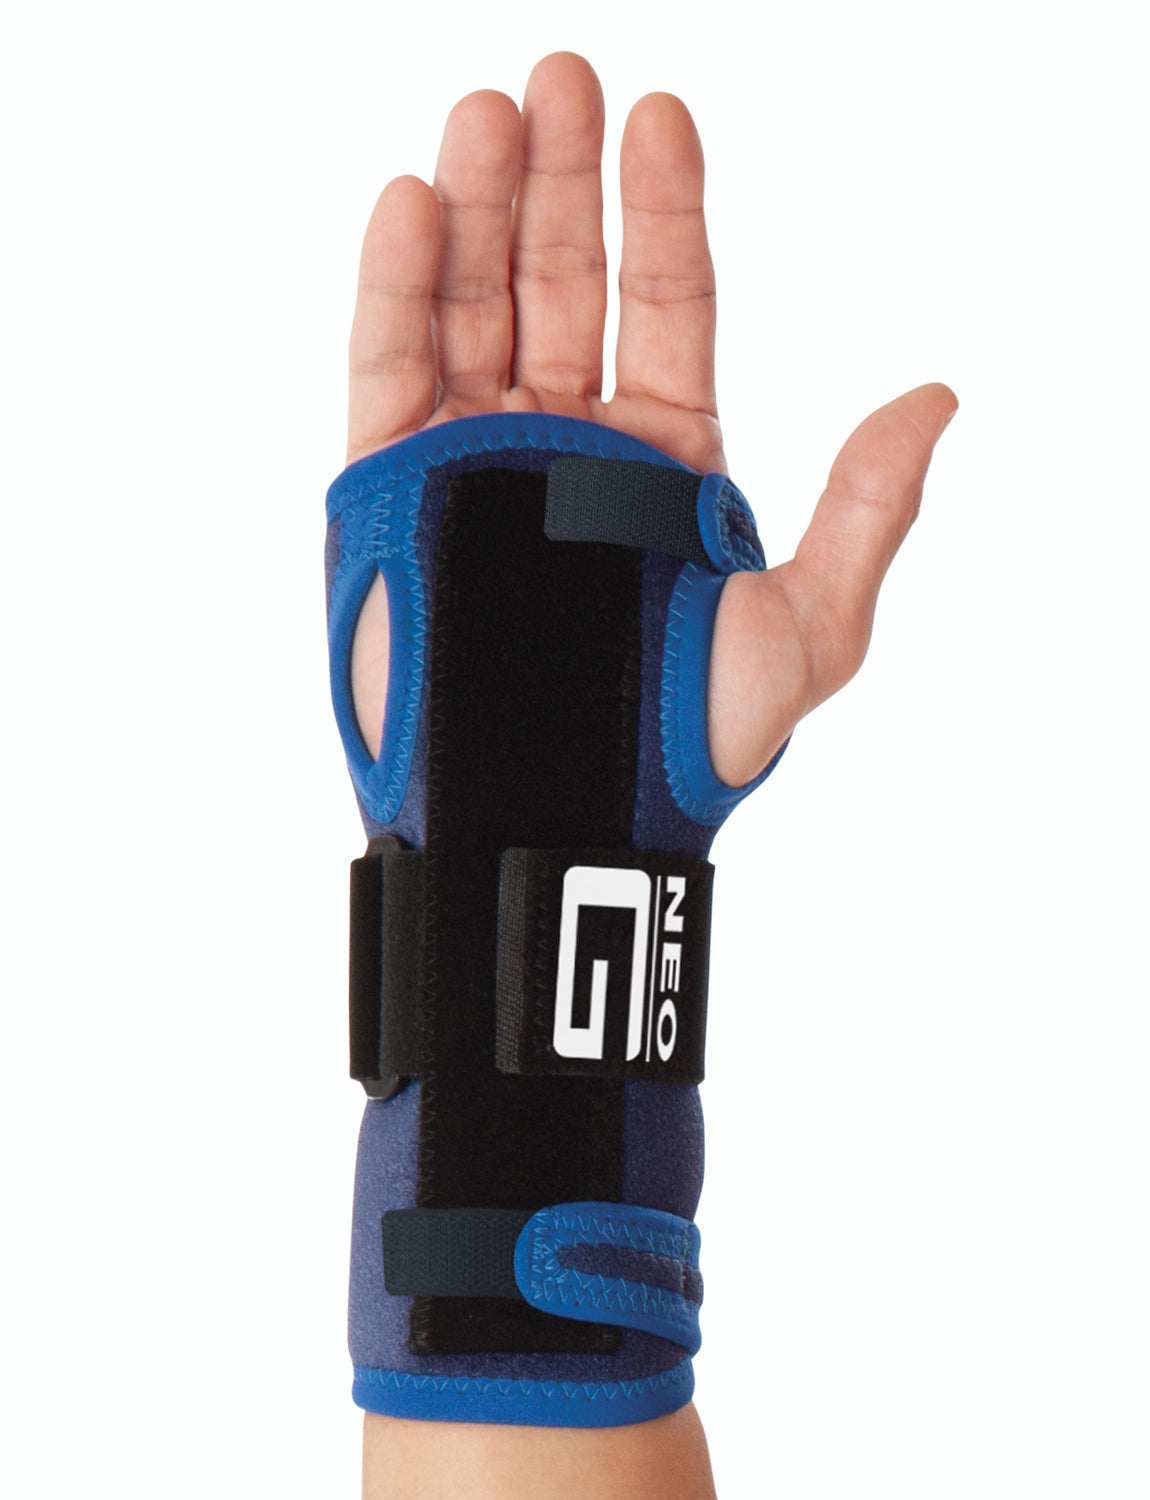 Performance Series Wrist Support - Dual Wrap-Around Strap, Universal, 1  count